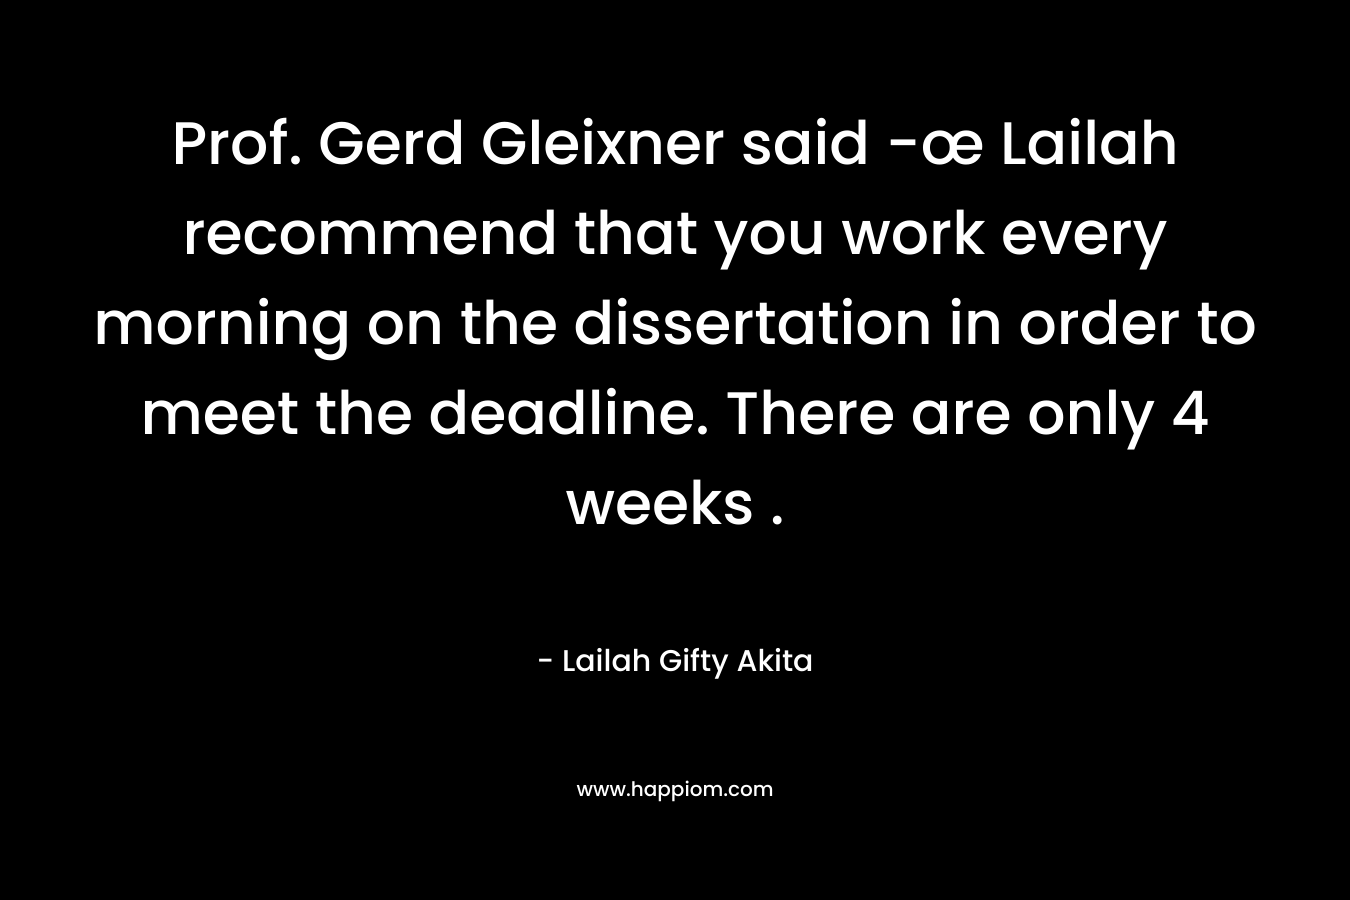 Prof. Gerd Gleixner said -œ Lailah recommend that you work every morning on the dissertation in order to meet the deadline. There are only 4 weeks .